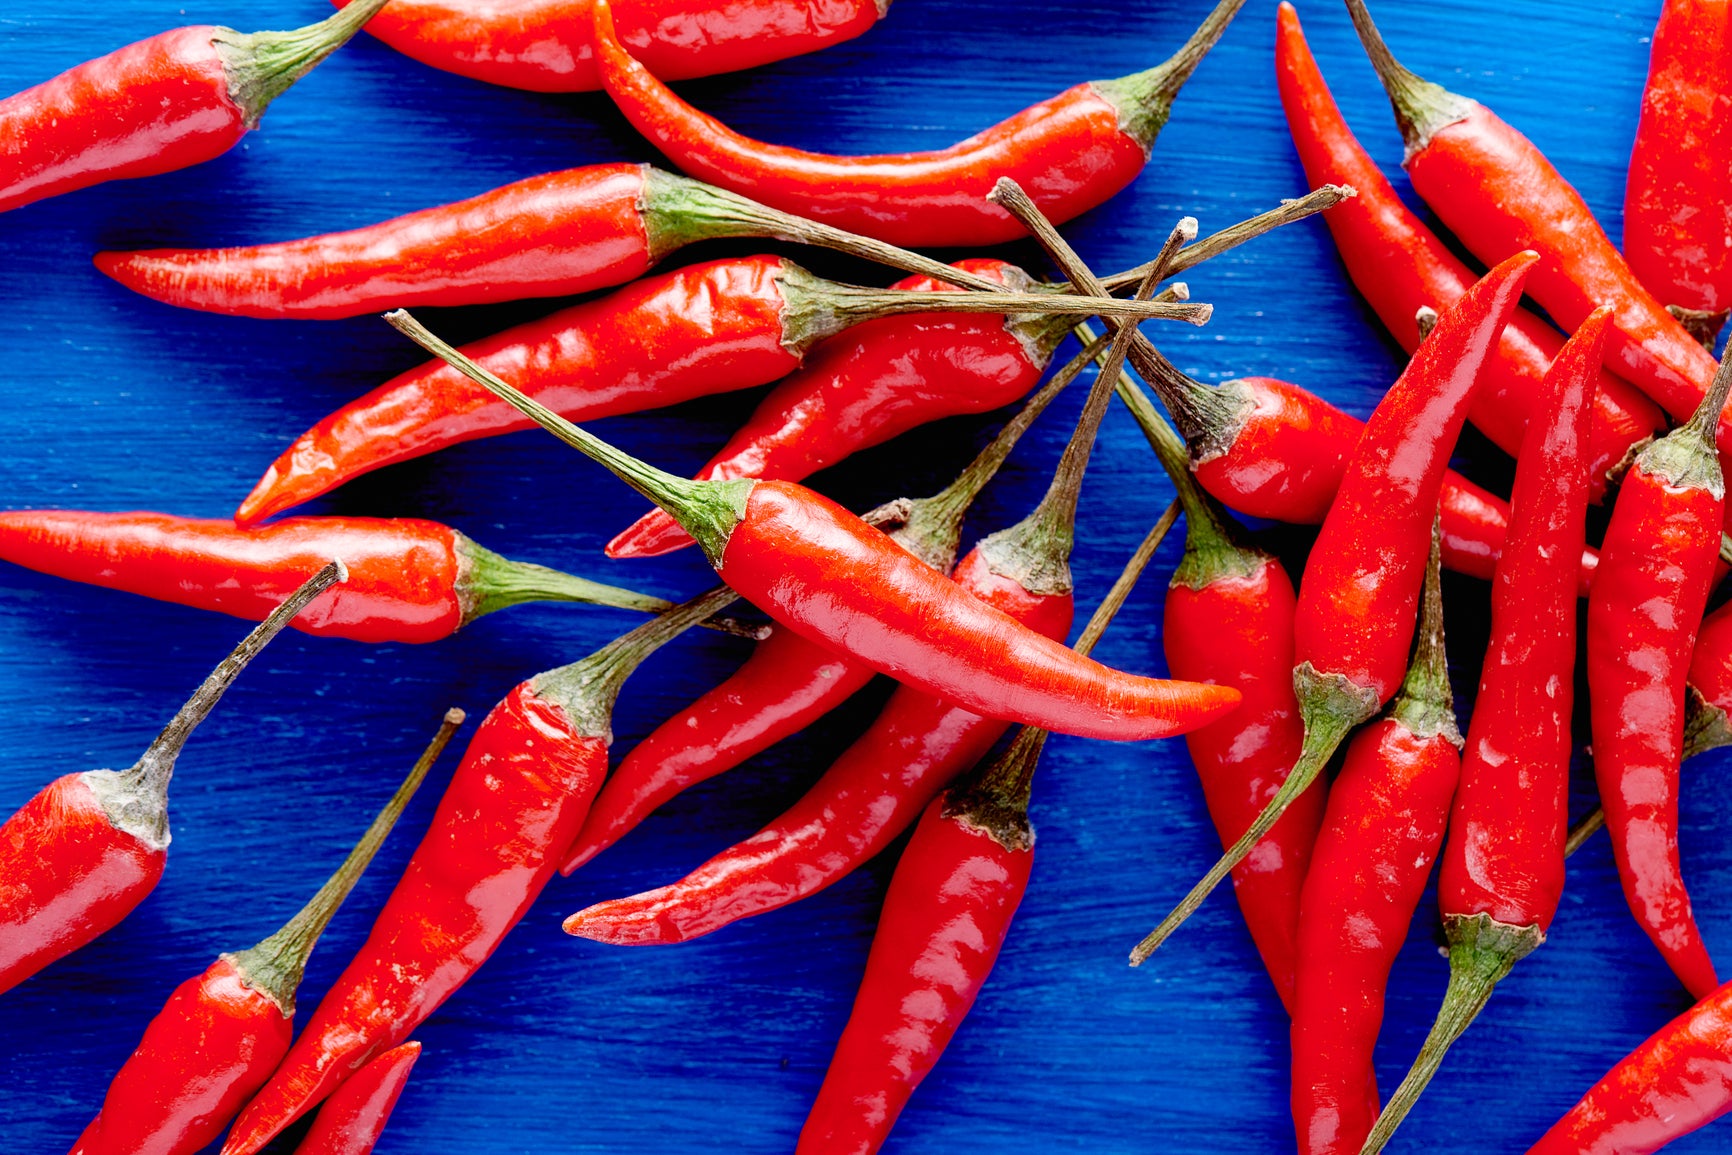 The history of chili peppers in Mexican cuisine